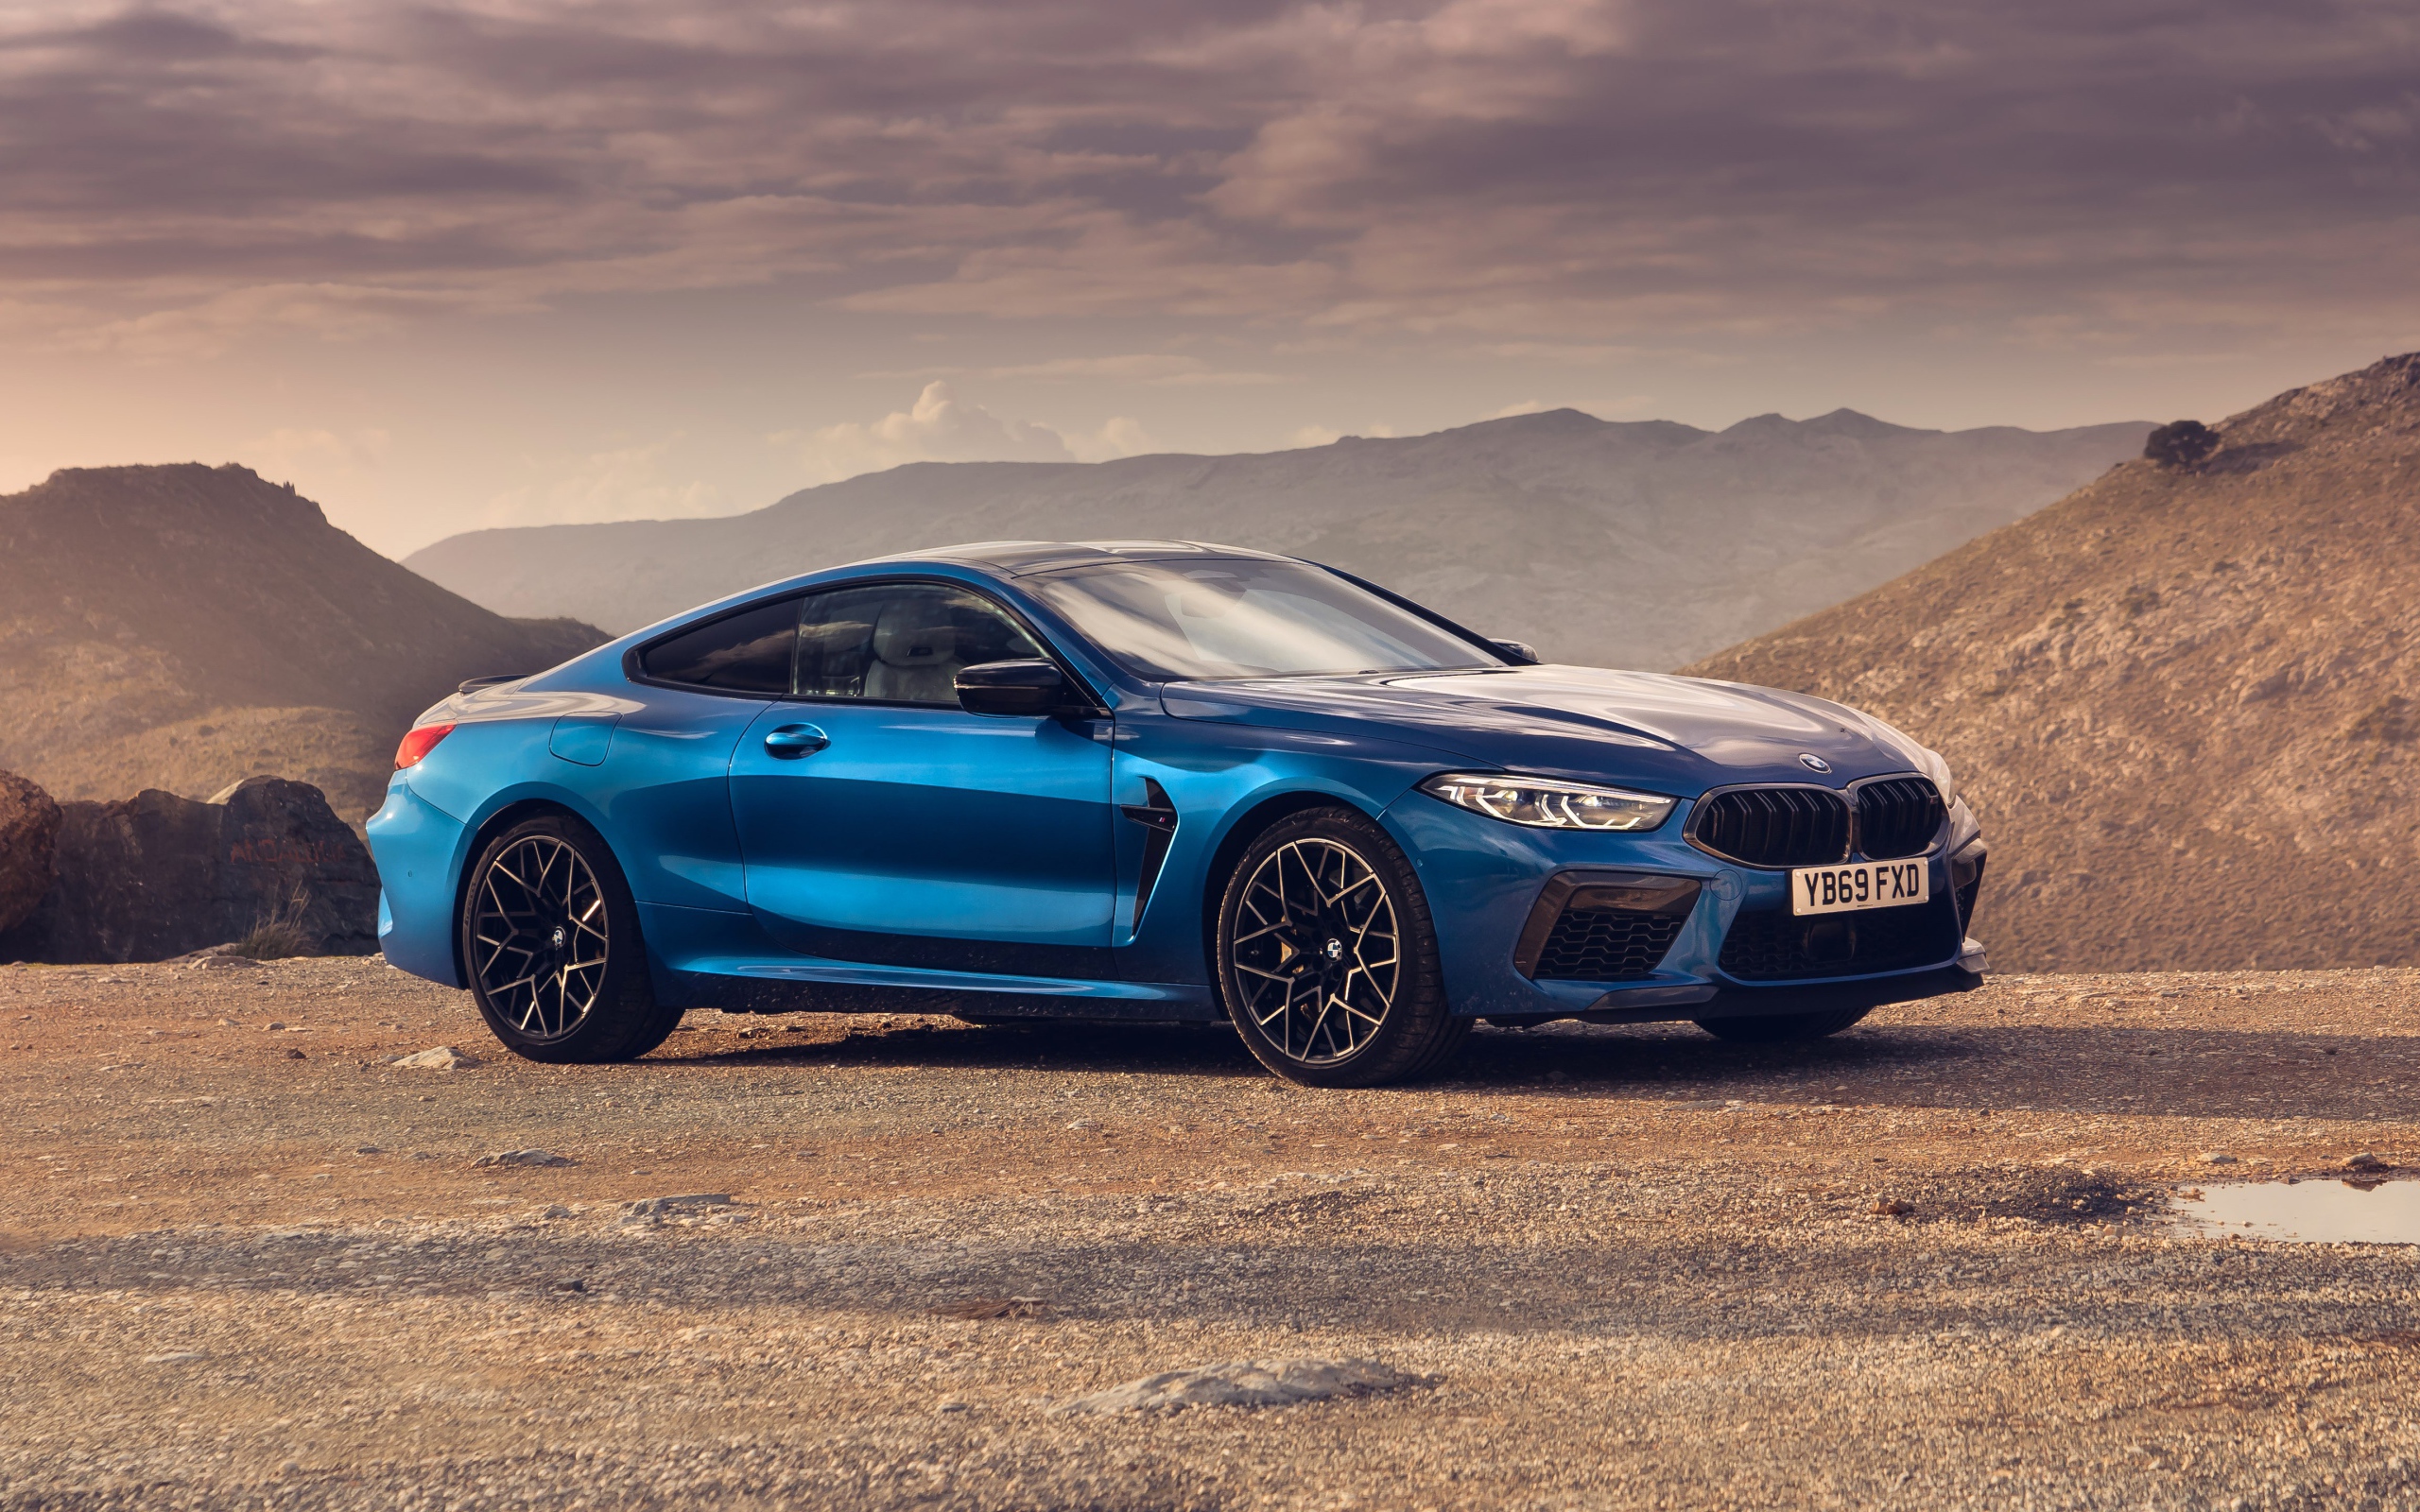 Bmw m 8 competition. BMW m8 2021. BMW m8 Competition 2021. BMW m8 Competition Coupe 2021. BMW m8 2019.